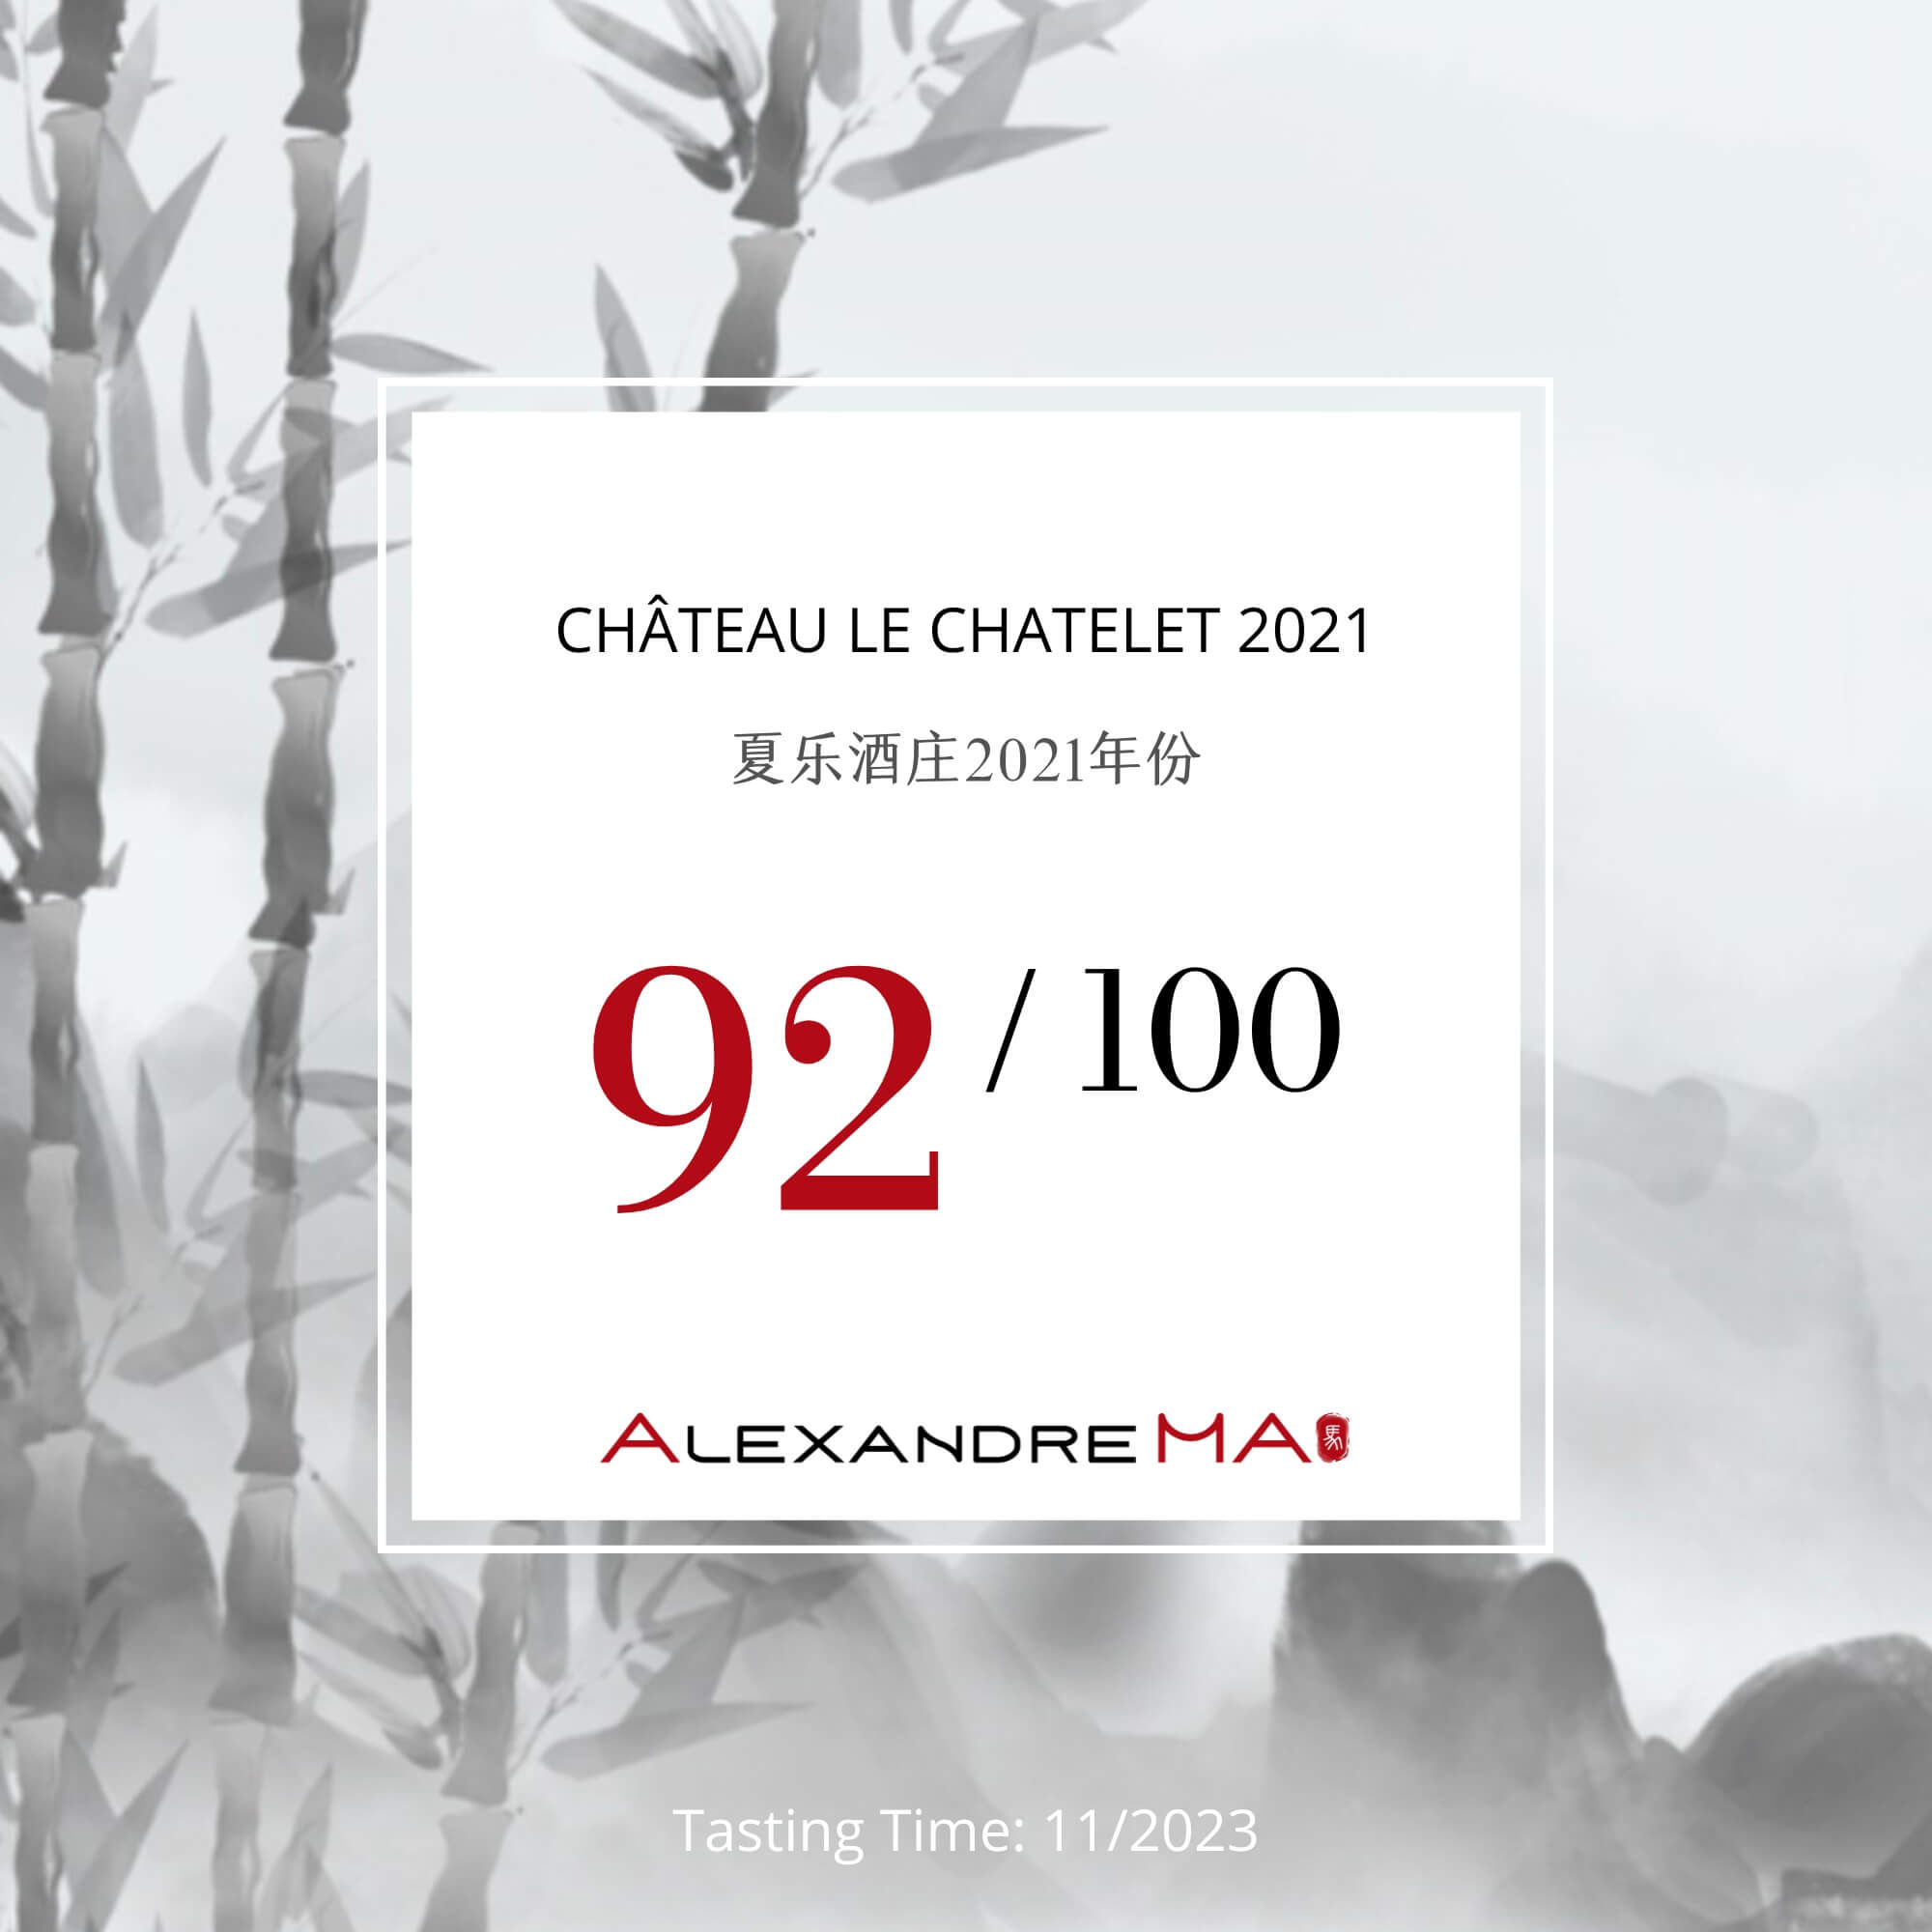 Château Le Chatelet 2021 夏乐酒庄 - Alexandre Ma